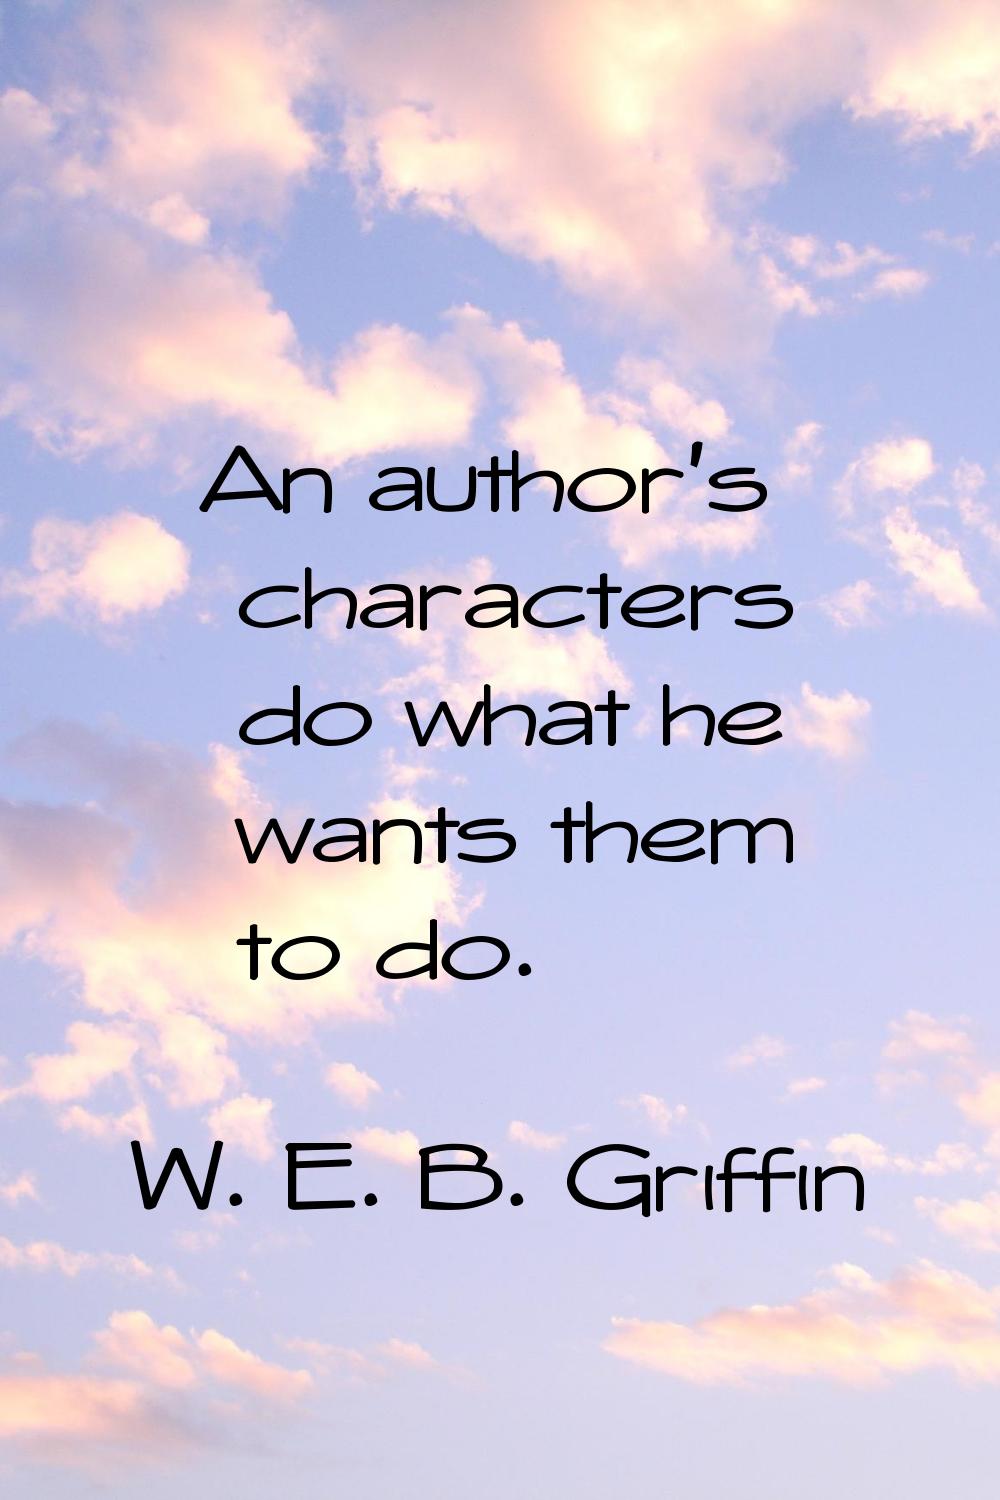 An author's characters do what he wants them to do.